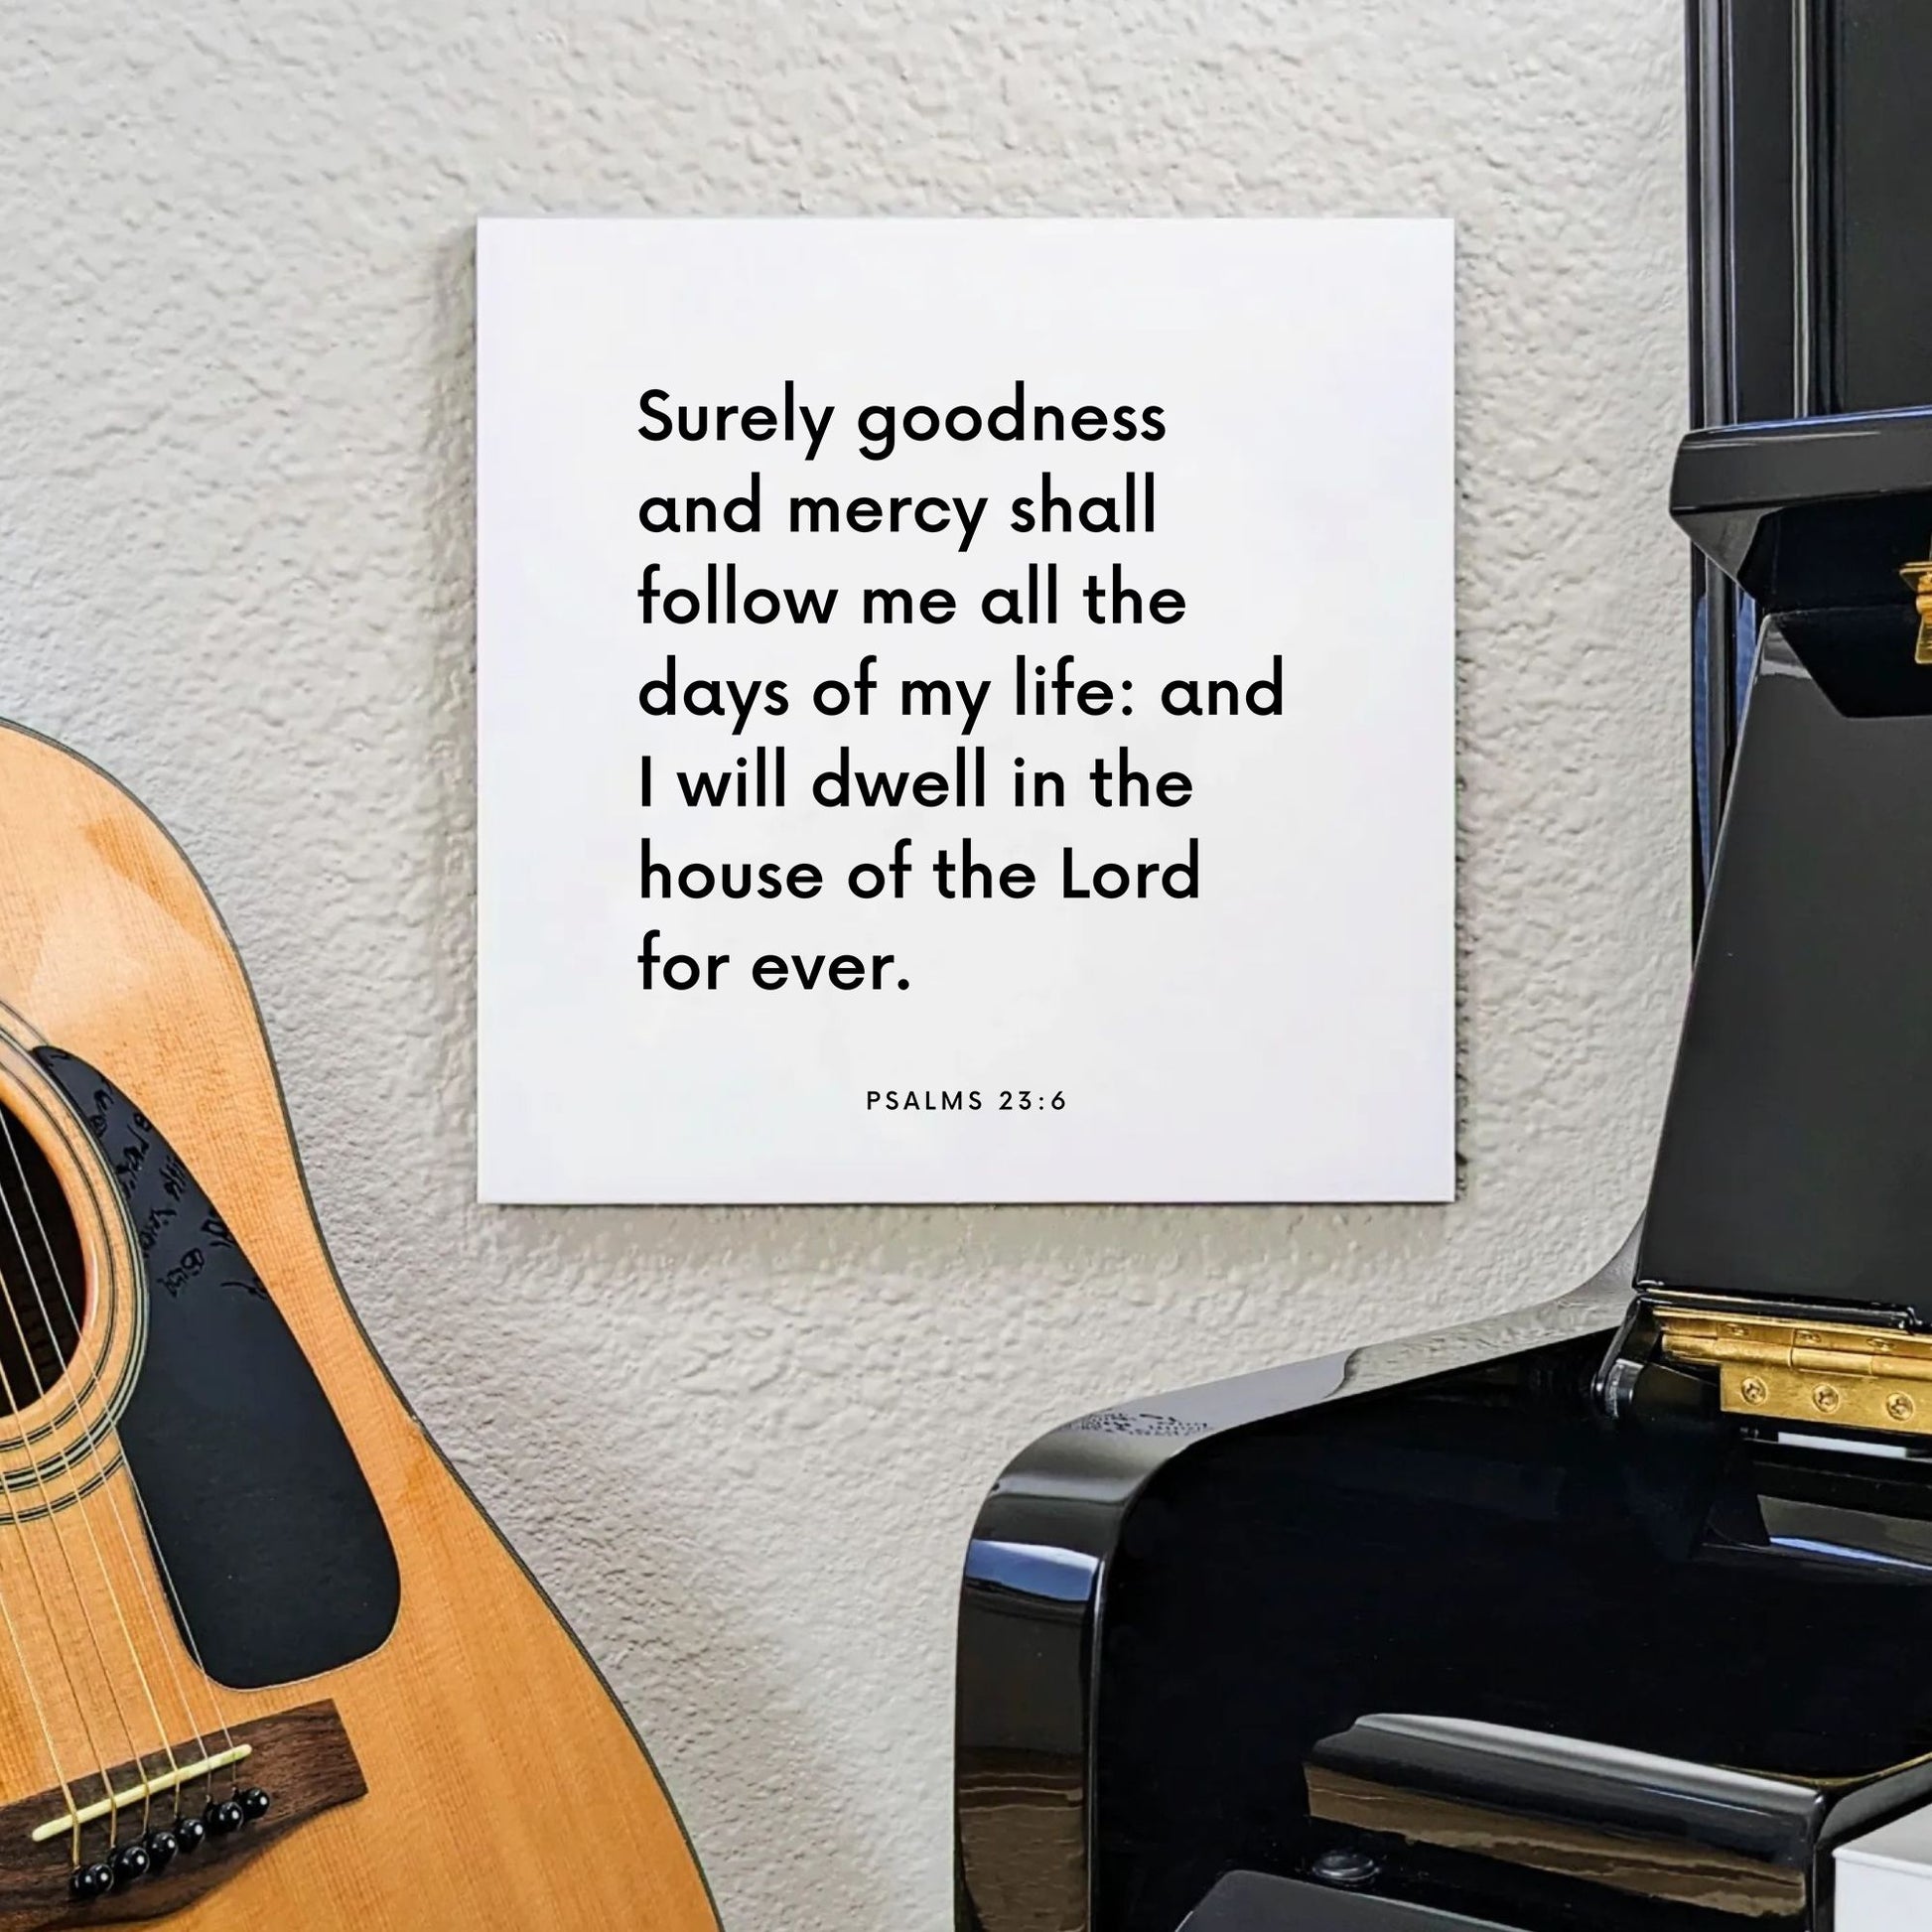 Music mouting of the scripture tile for Psalms 23:6 - "Surely goodness and mercy shall follow me"